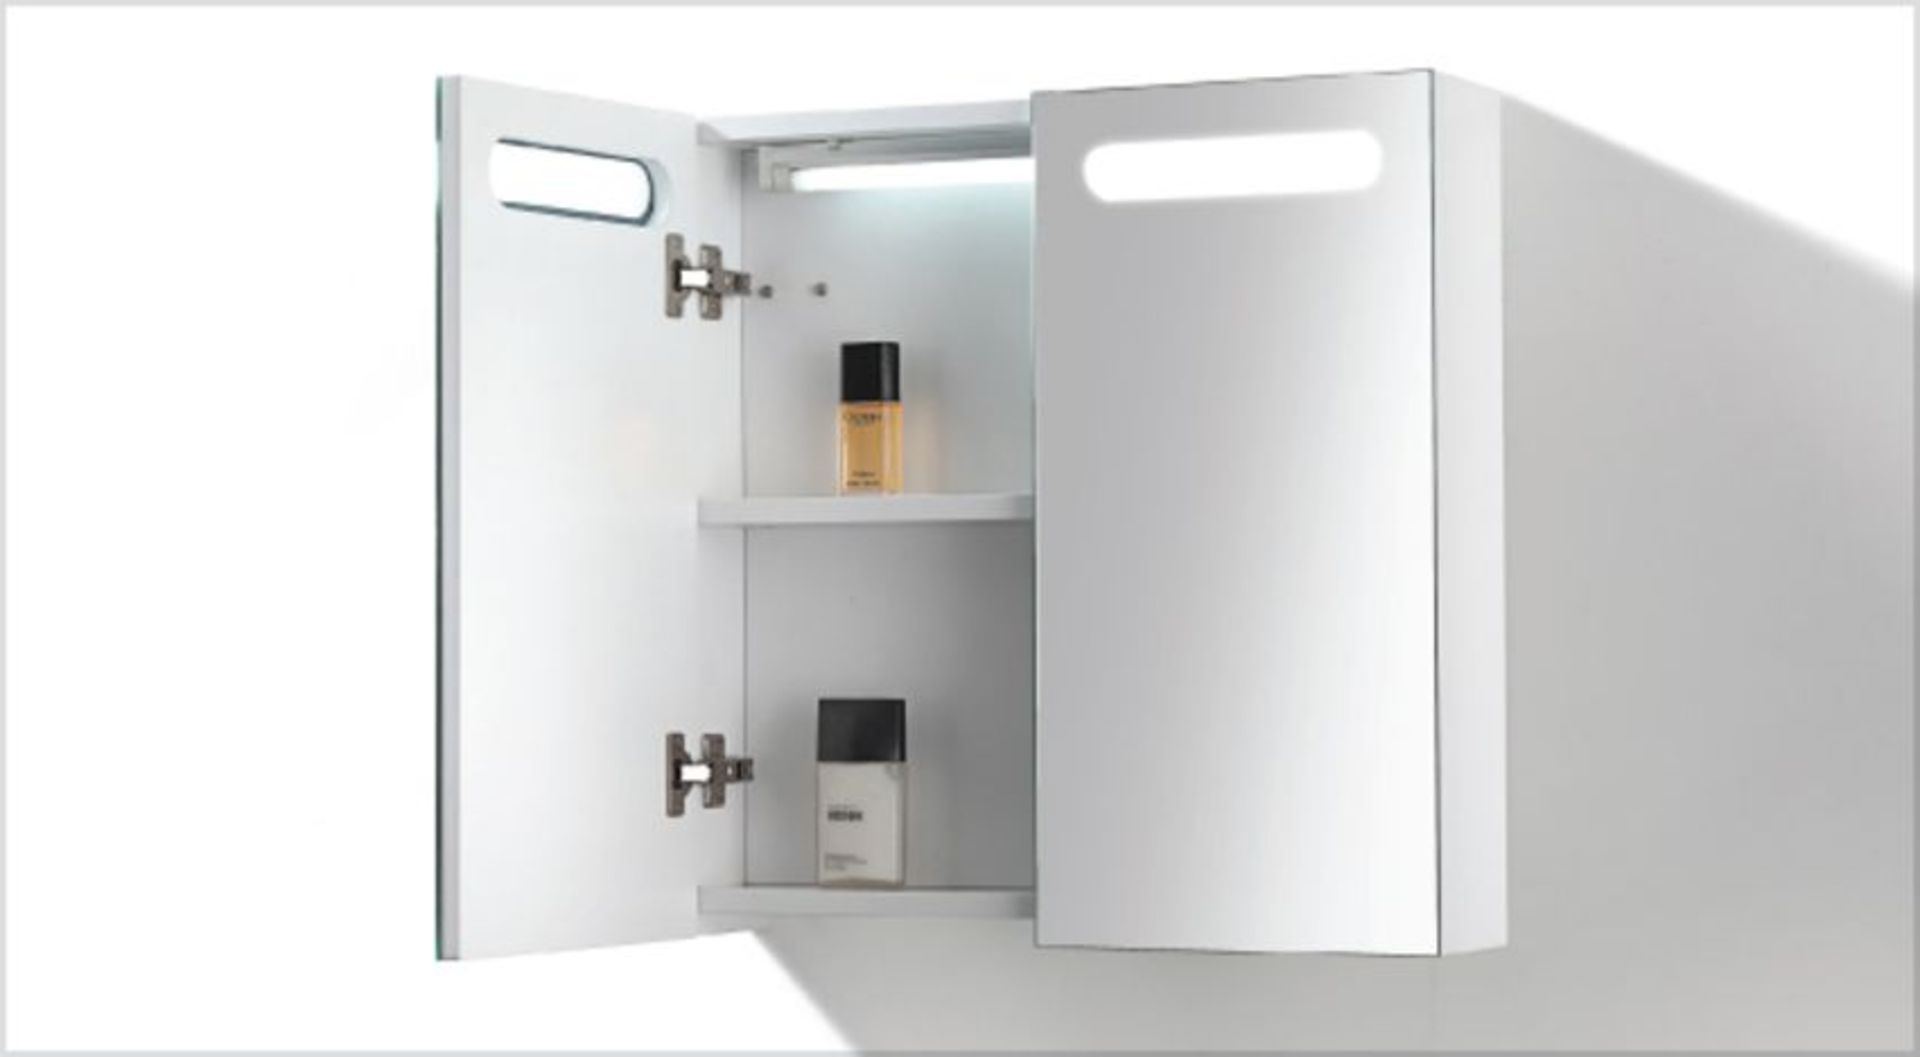 1 x Austin Bathrooms EDEN Two Door 600mm Mirrored Bathroom Cabinet - New and Boxed - RRP £320 - Ref: - Image 2 of 3